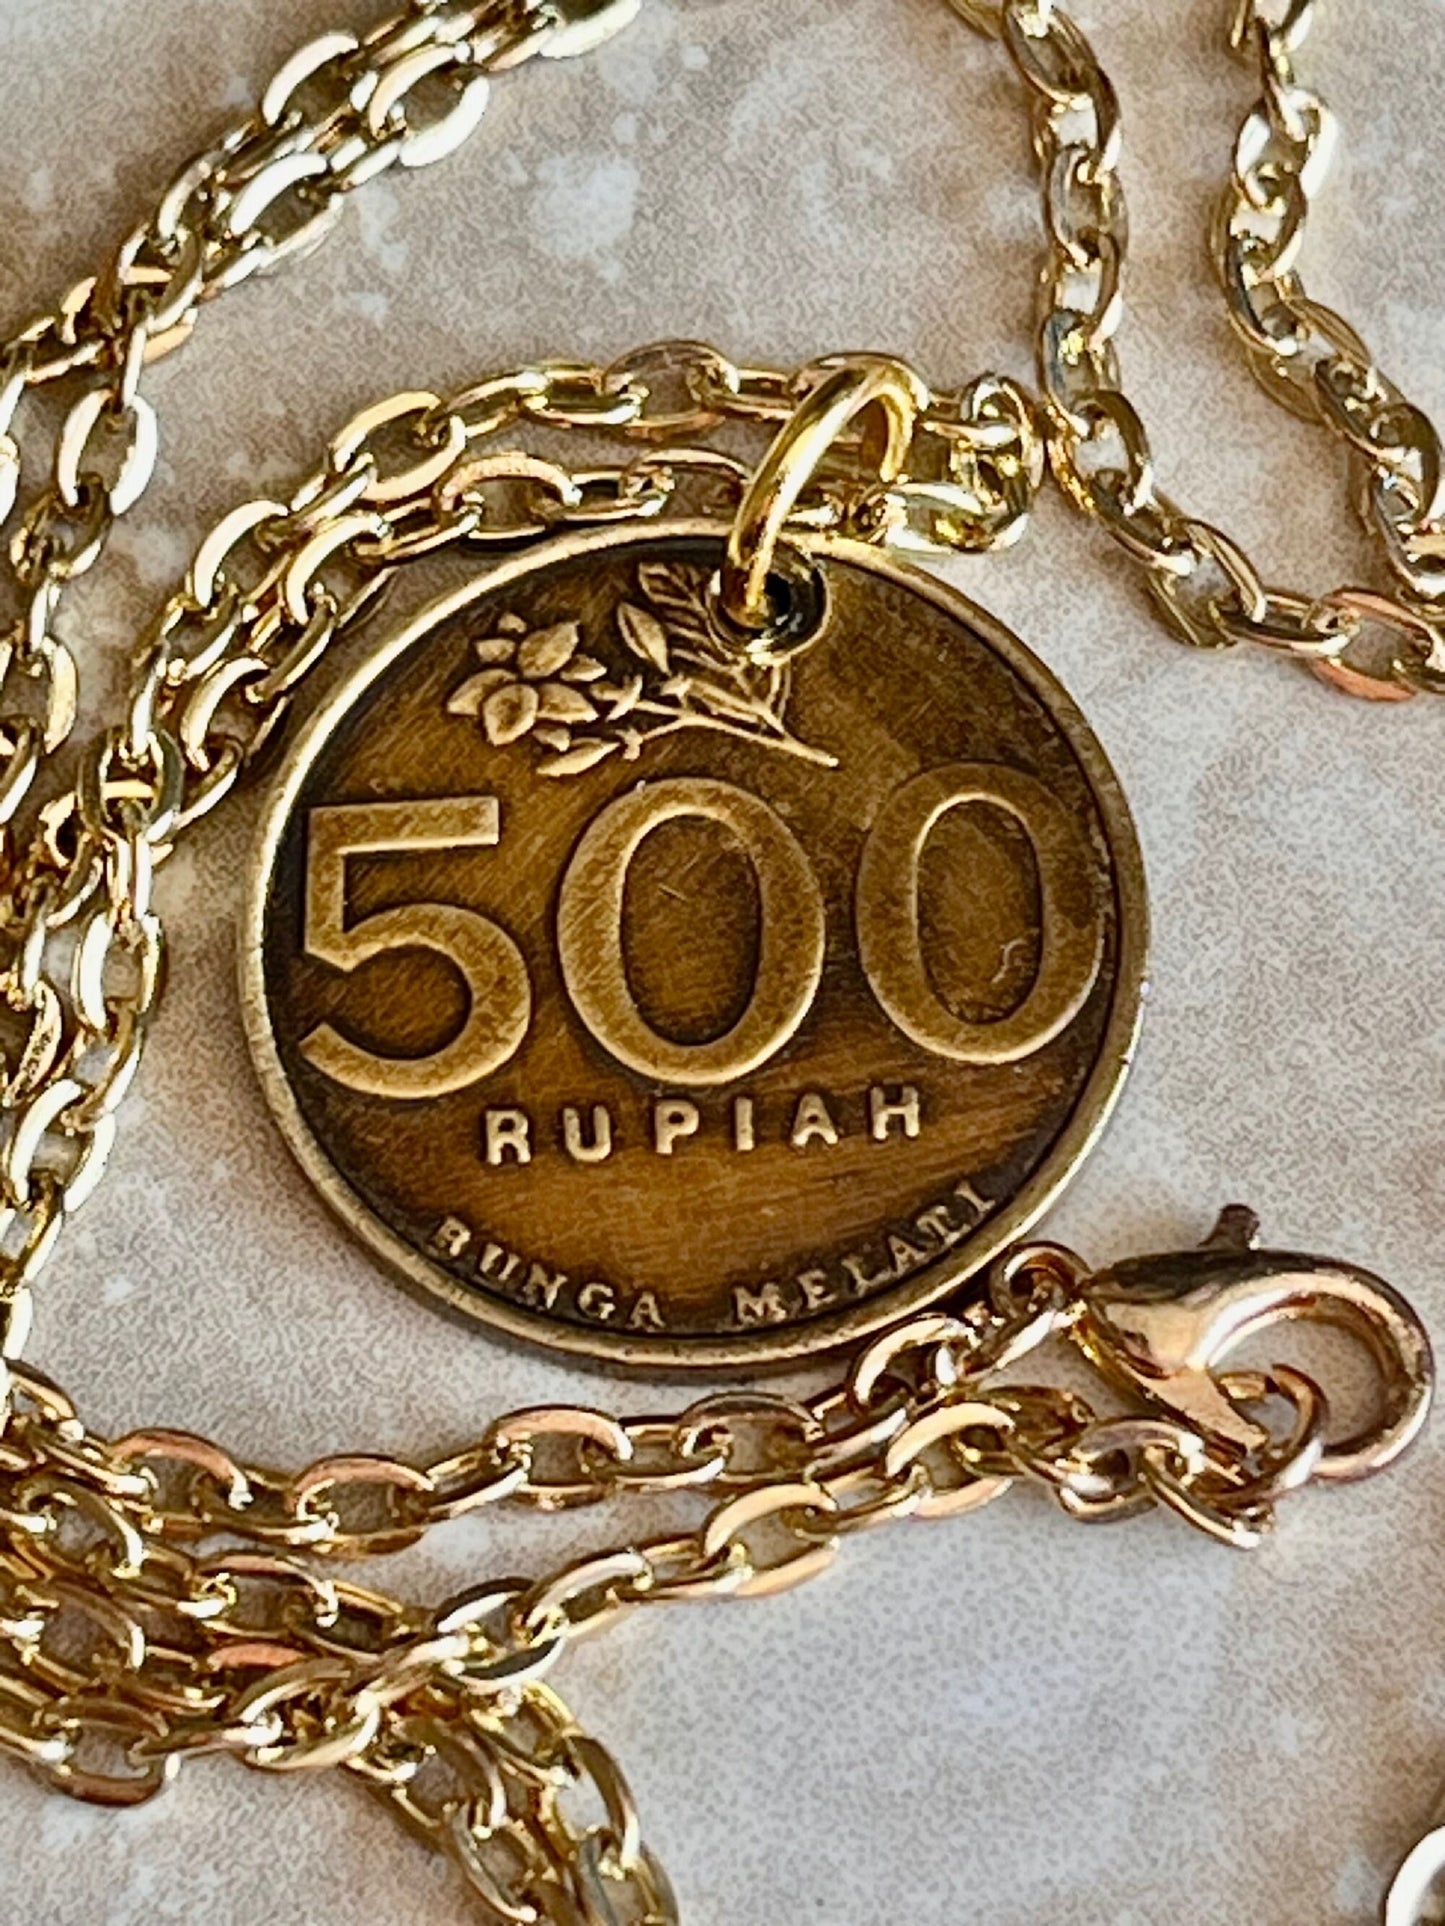 Indonesia Coin 500 Rupiah Necklace Coin Pendant Personal Old Vintage Handmade Jewelry Gift Friend Charm For Him Her World Coin Collector